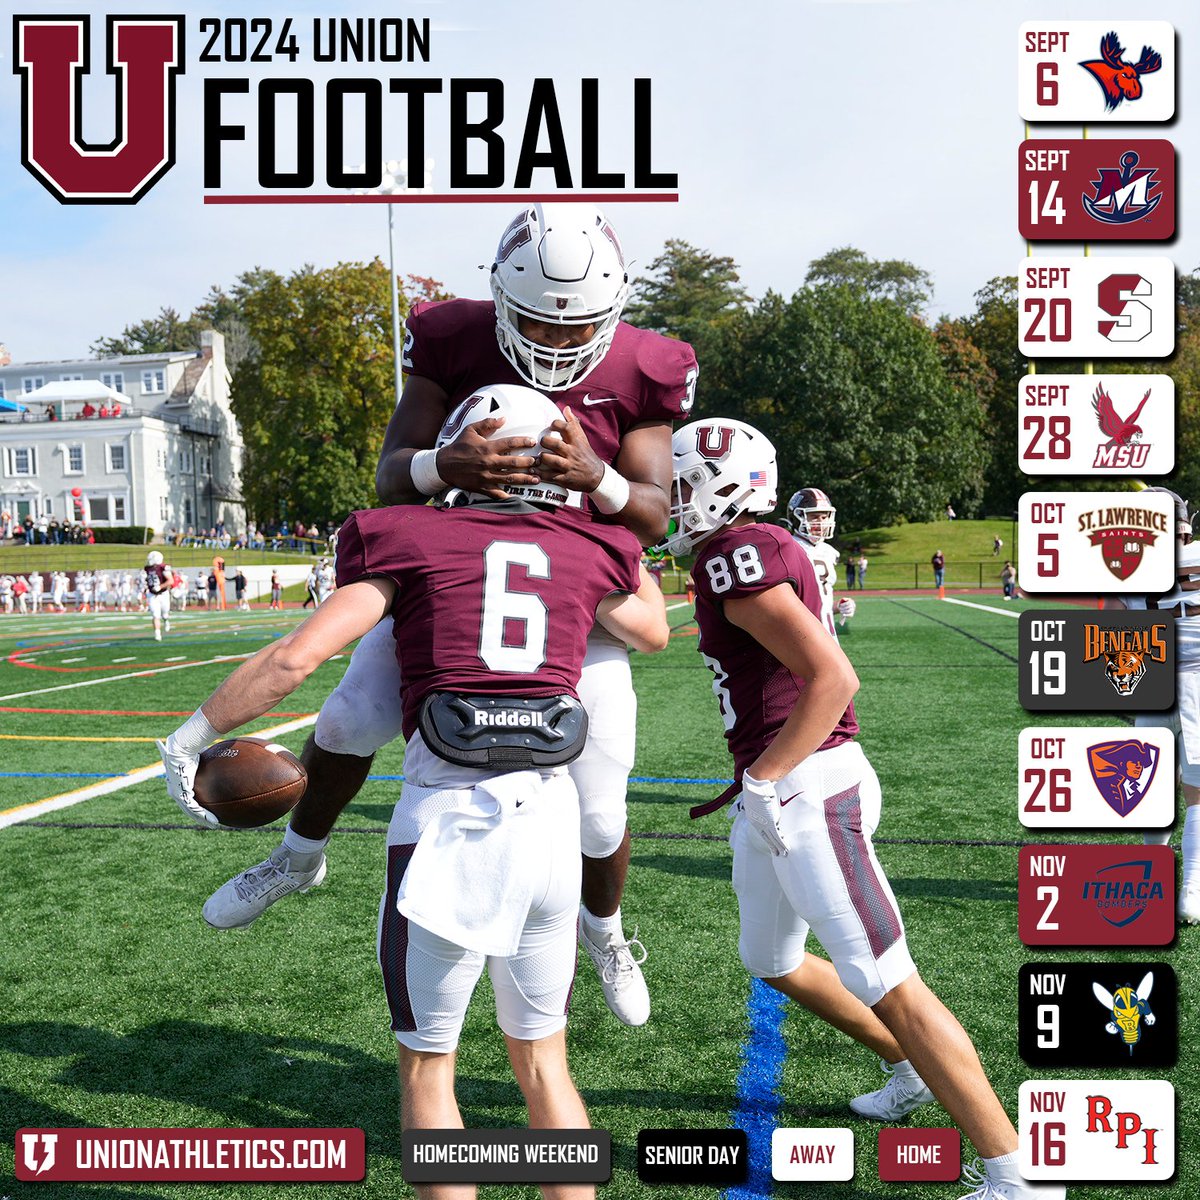 The 2024 season is coming soon! We look forward to getting back on the field this fall and seeing U at Frank Bailey Field and on the road! #GoU #d3fb #FTC #1Percent